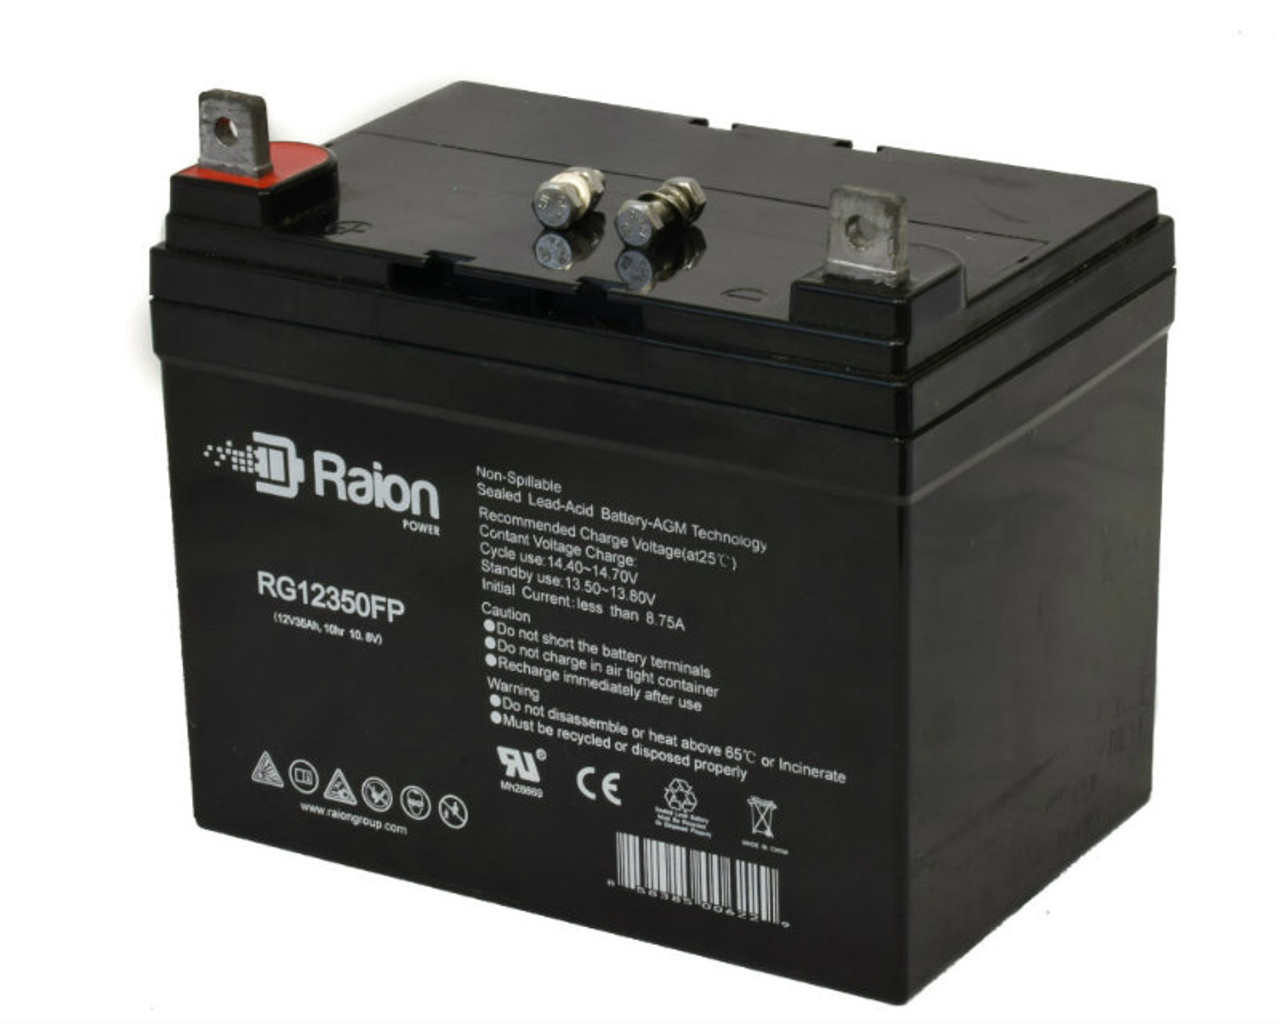 Raion Power Replacement 12V 35Ah RG12350FP Mobility Scooter Battery for Quickie P120